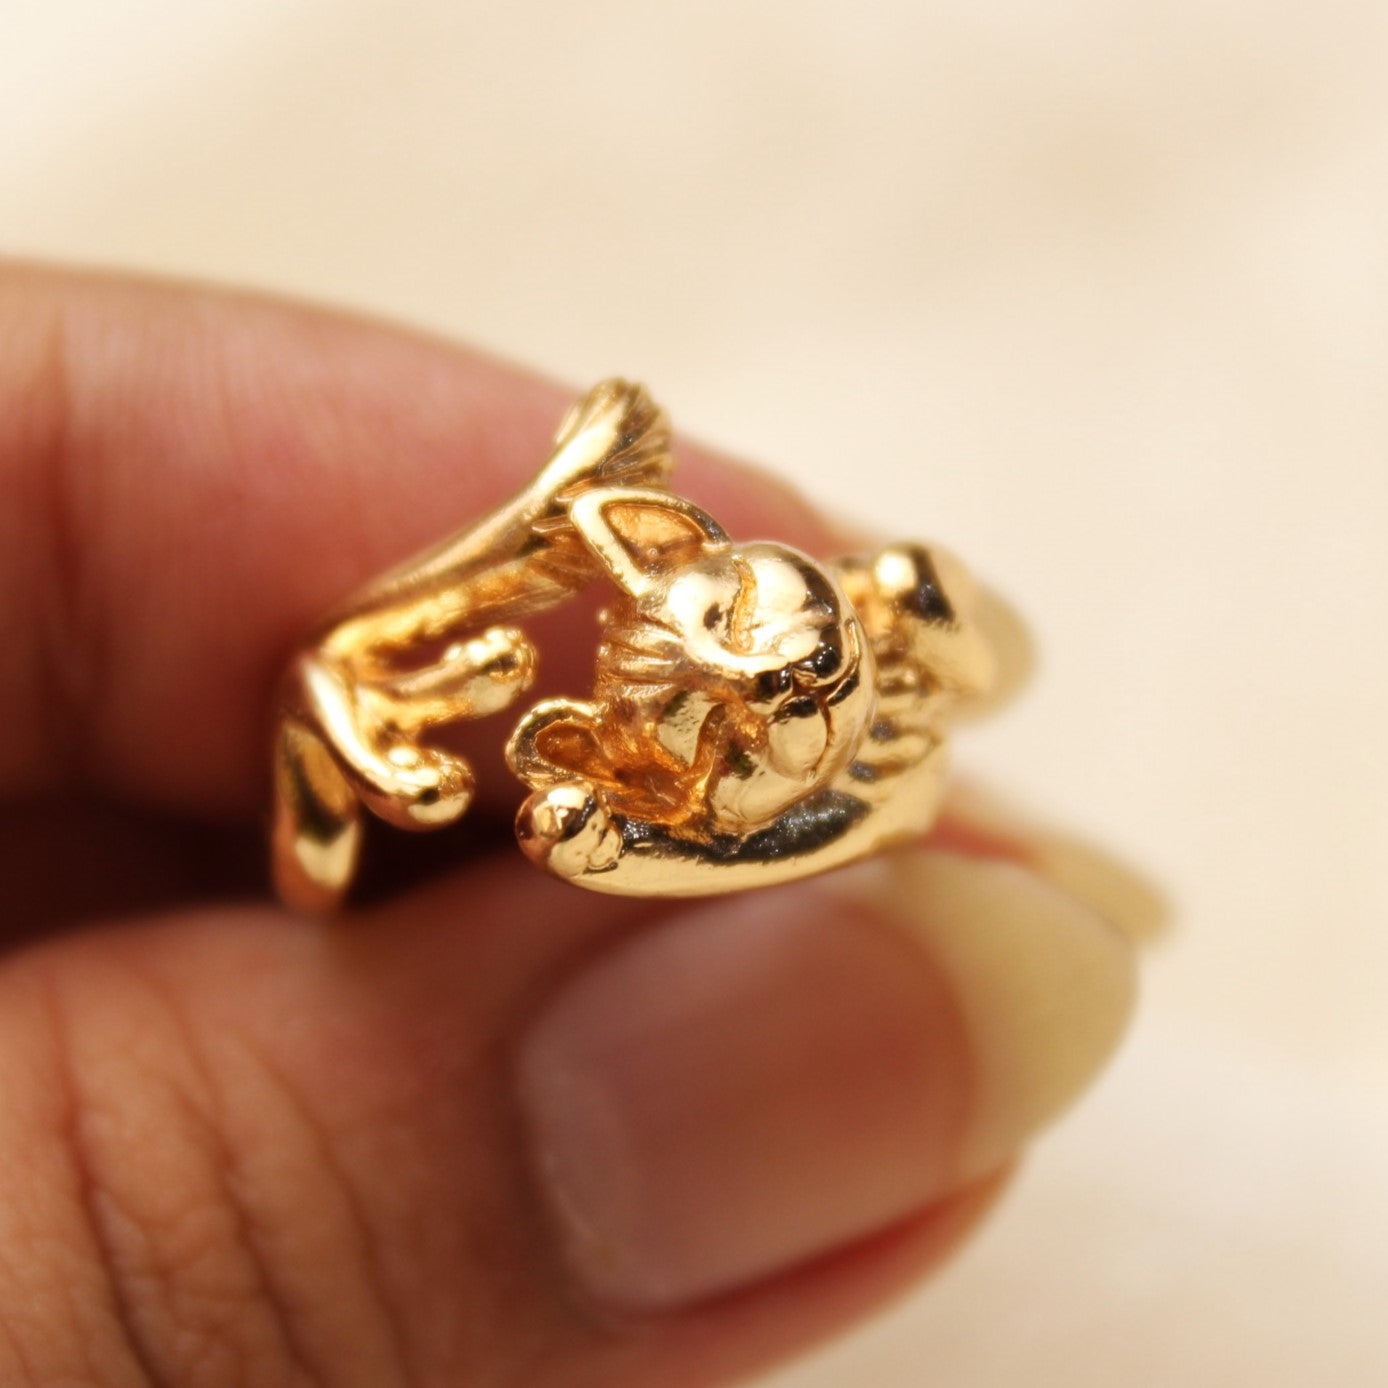 TFC 24K Kitty Cat Gold Plated Adjustable Ring